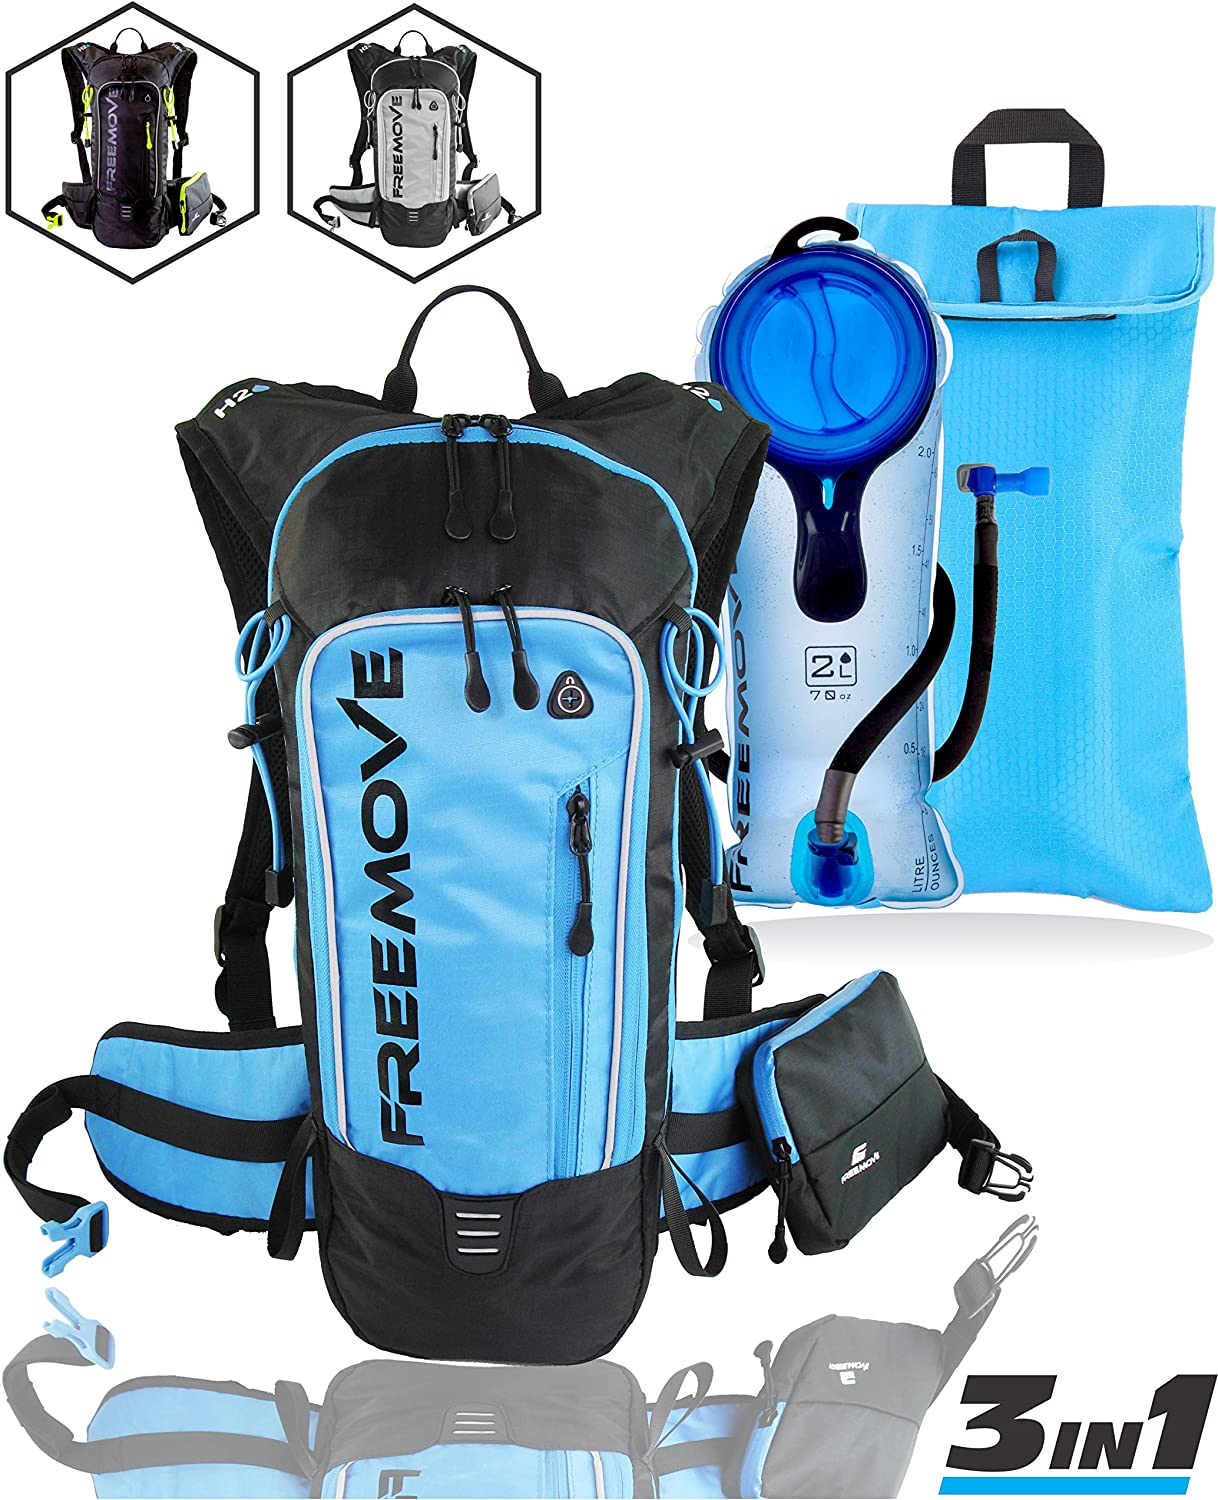 MTB Cycling… FREEMOVE Hydration Pack Backpack Running Water Stays Cool 5 Hours with 2L Hydration Bladder and Cooler Bag  for Hiking